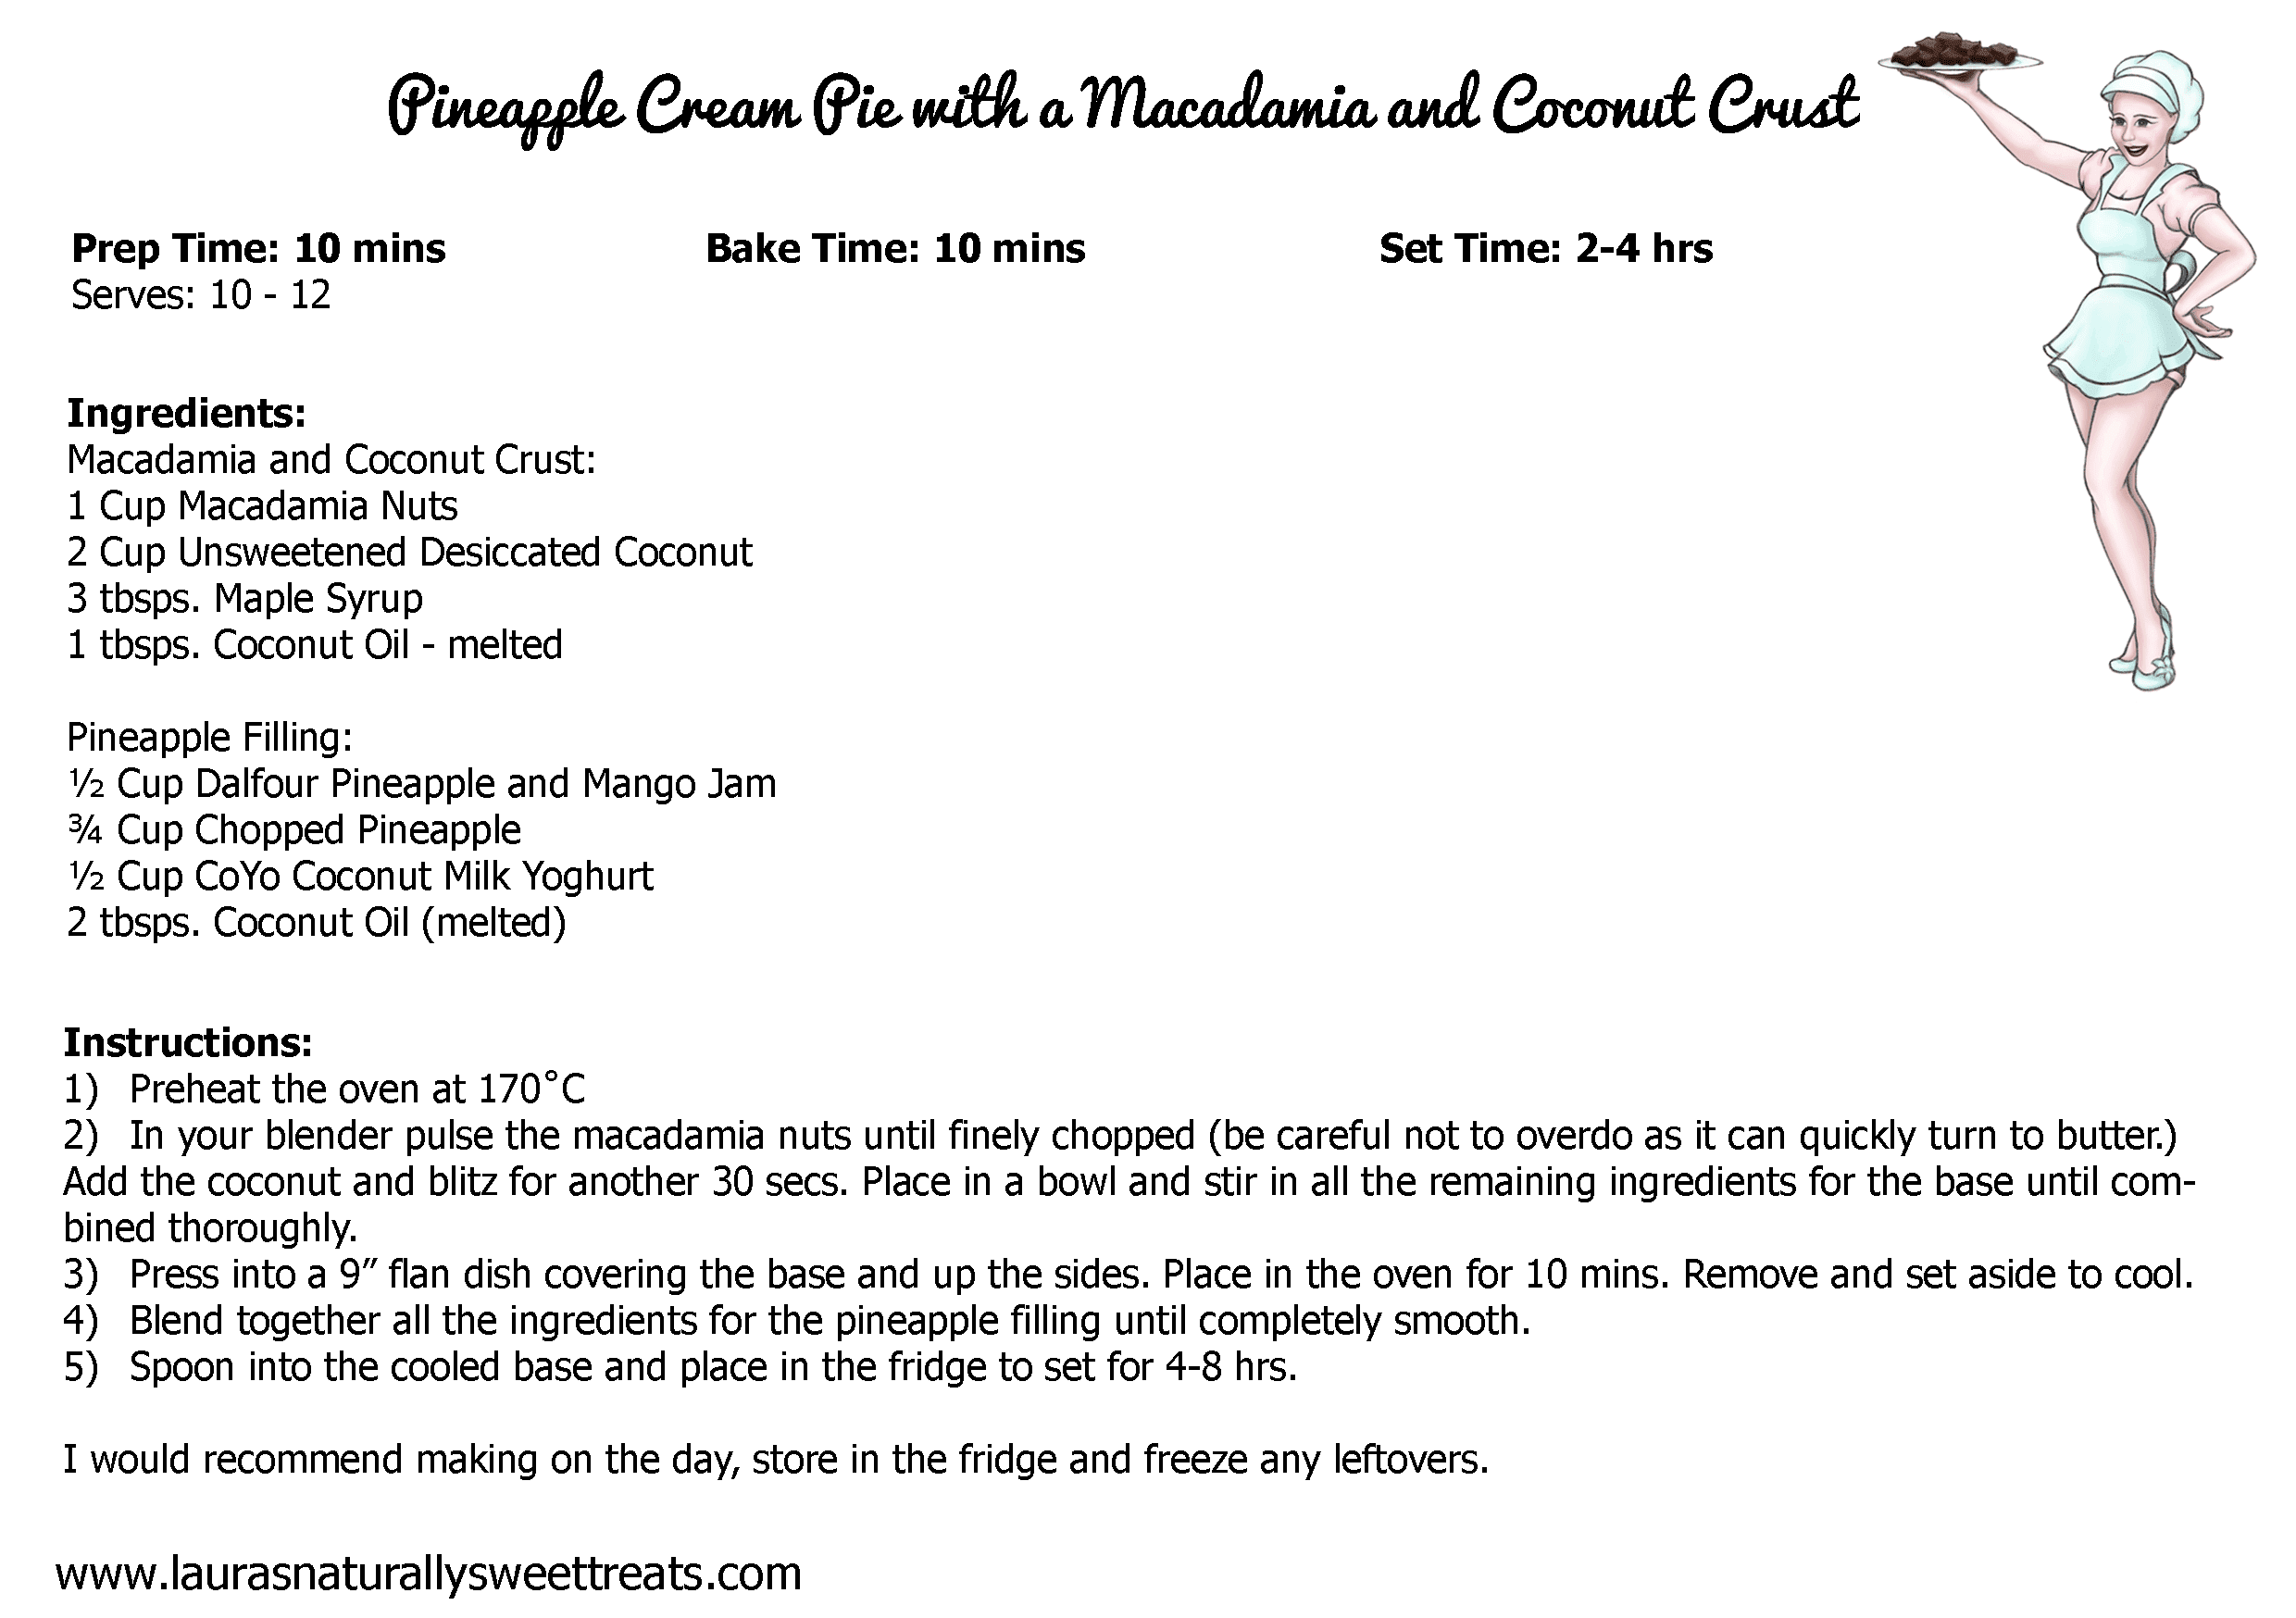 pineapple cream pie with a macadamia and coconut crust recipe card